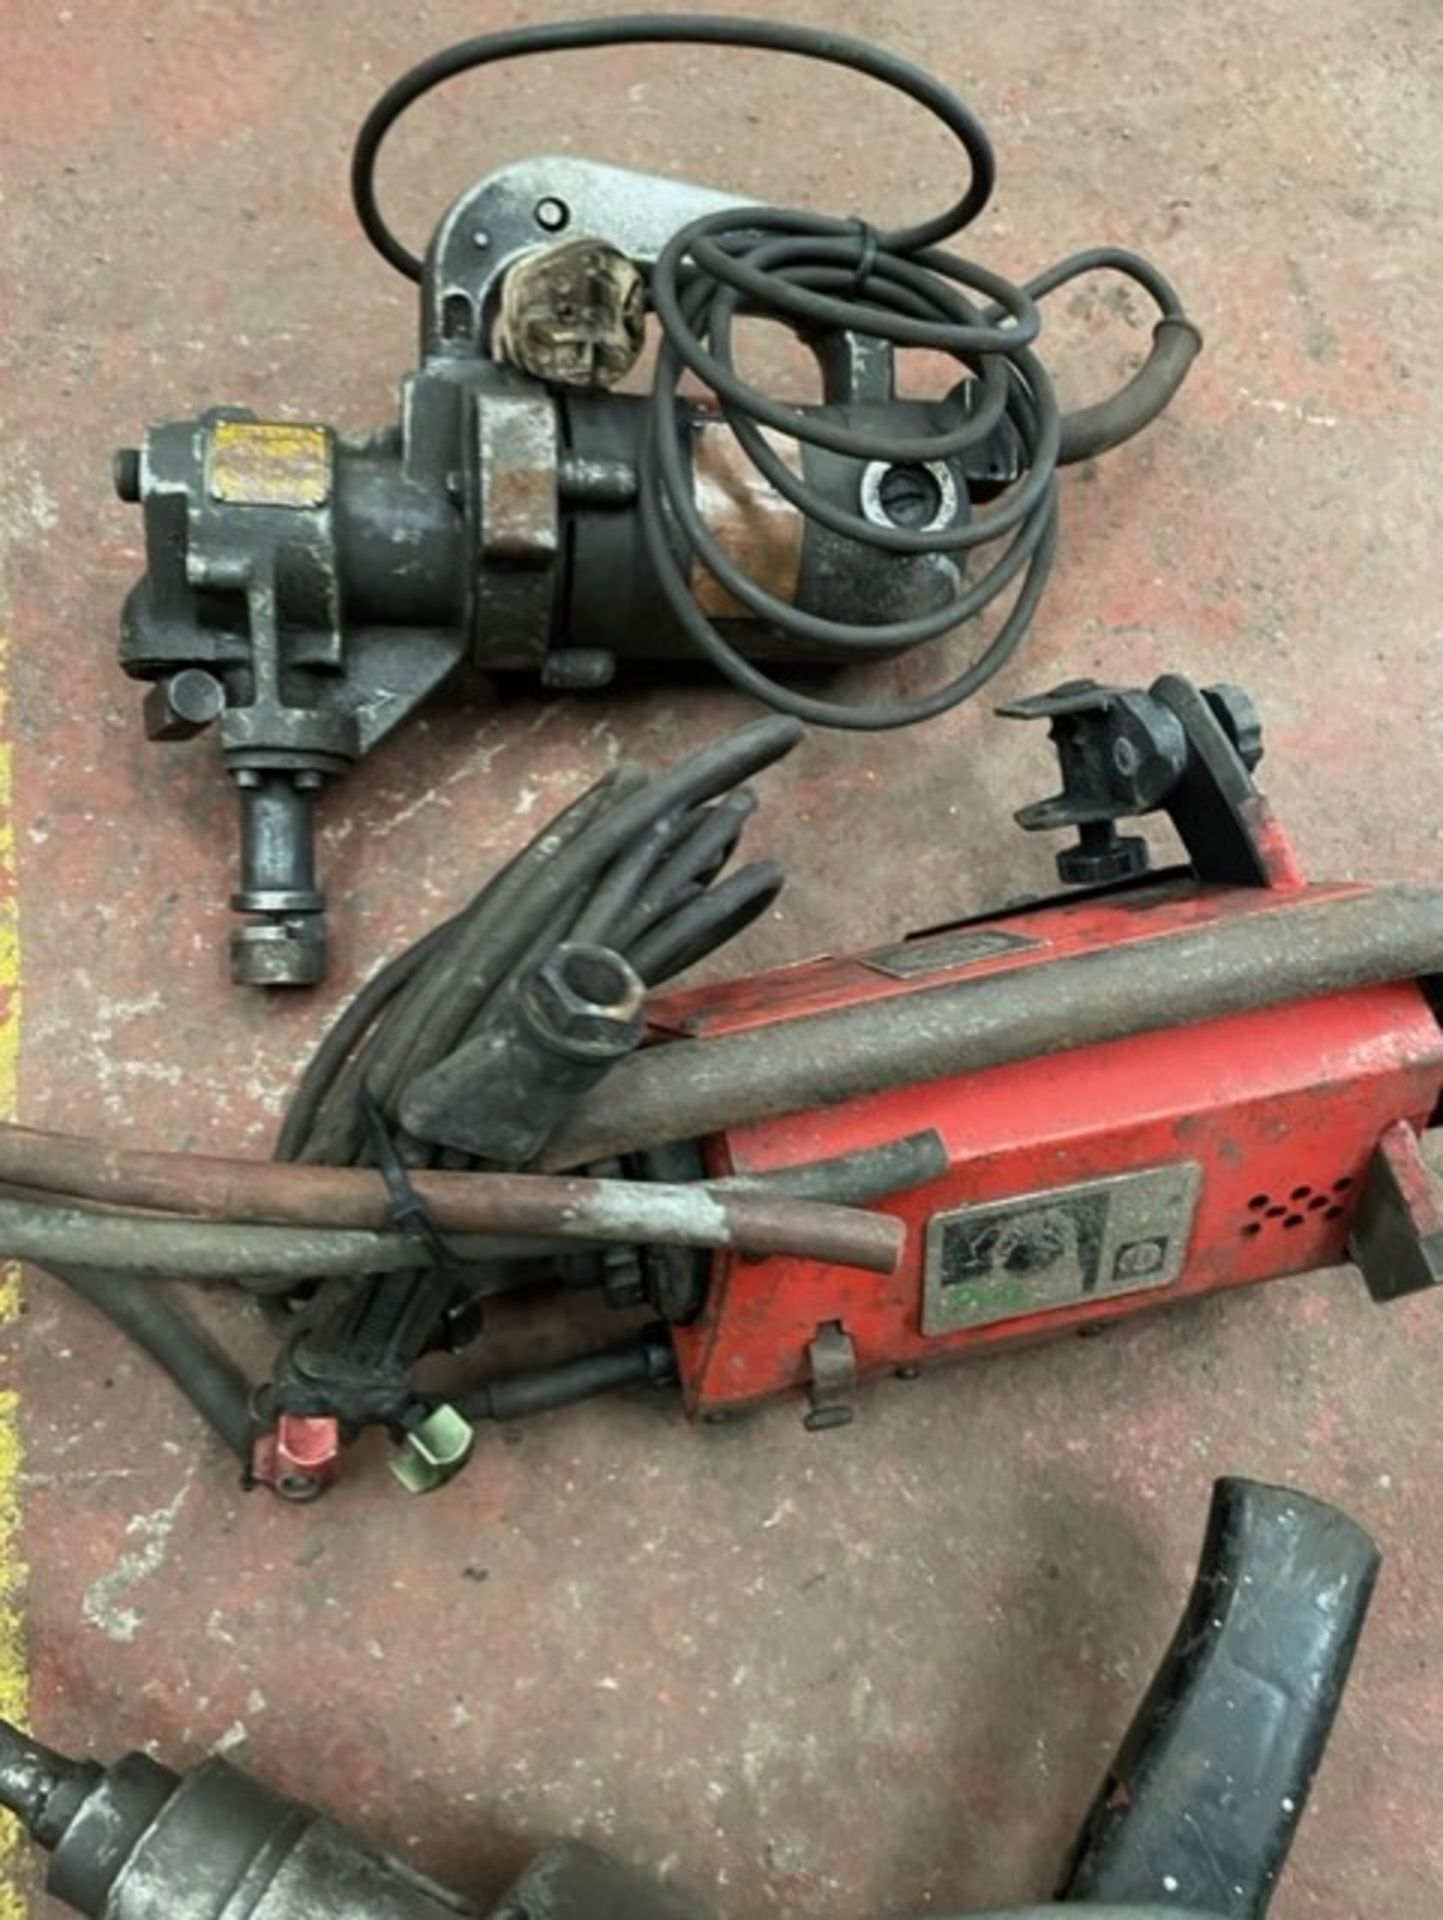 Very old 240 volt bits of machinery don’t no if valuable or scrap - Image 2 of 4